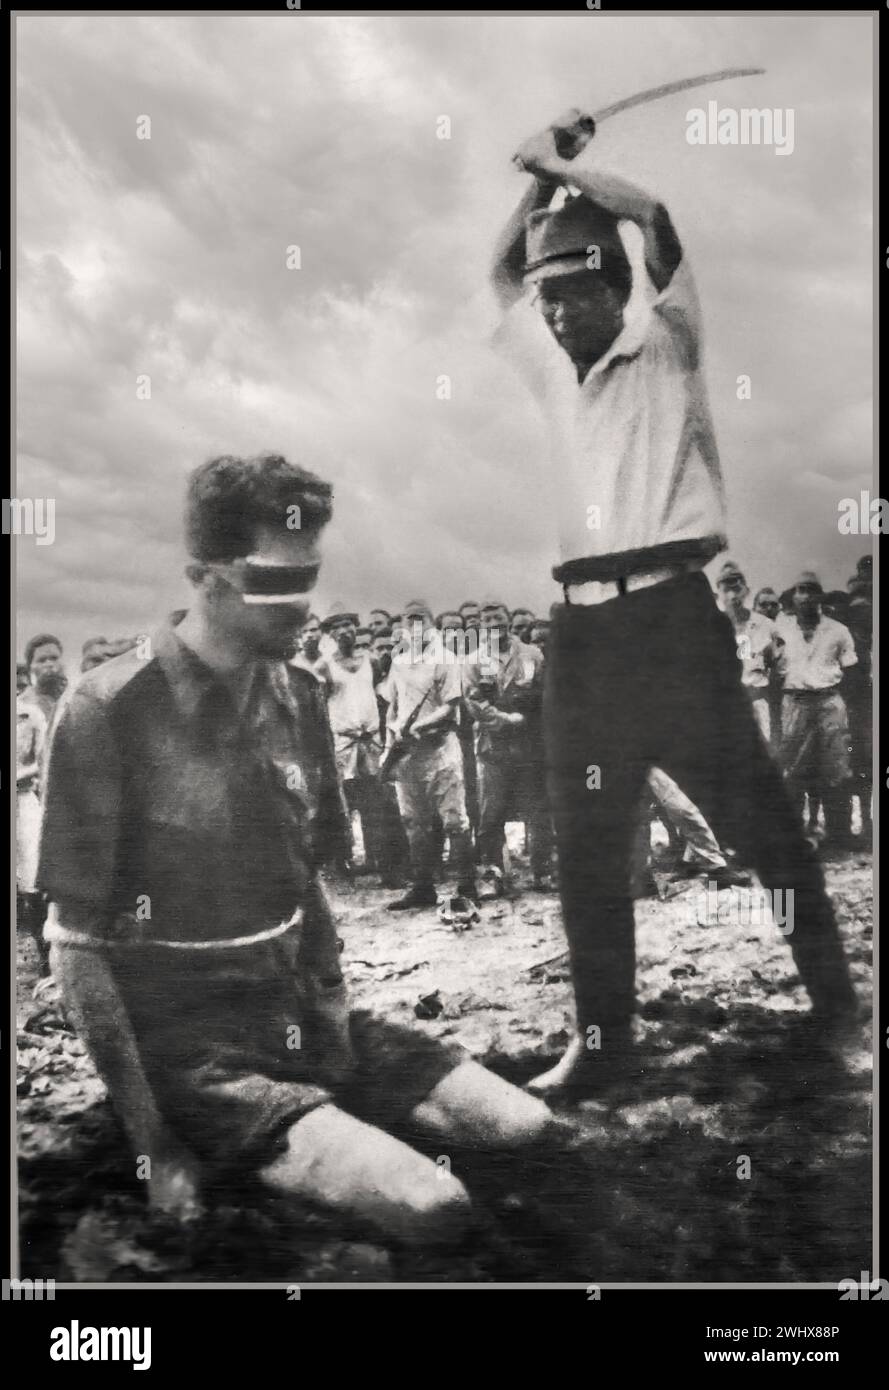 WW2 JAPANESE WAR CRIME BEHEADING OF SERGEANT SIFFLEET SHOCKING JAPANESE ATROCITY Aitape, New Guinea. 24 October 1943. A photograph found on a dead Japanese soldier showing  (Sgt) Leonard G. Siffleet of 'M' Special Unit, wearing a blindfold and with his arms tied, about to be beheaded by sword by Yasuno Chikao. The execution was ordered by Vice Admiral Kamada, commander of Japanese Naval Forces at Aitape. Sgt Siffleet was captured with Private (Pte) Pattiwahl and Pte Reharin, Ambonese members of the Netherlands East Indies Forces, whilst engaged in reconnaissance. Stock Photo